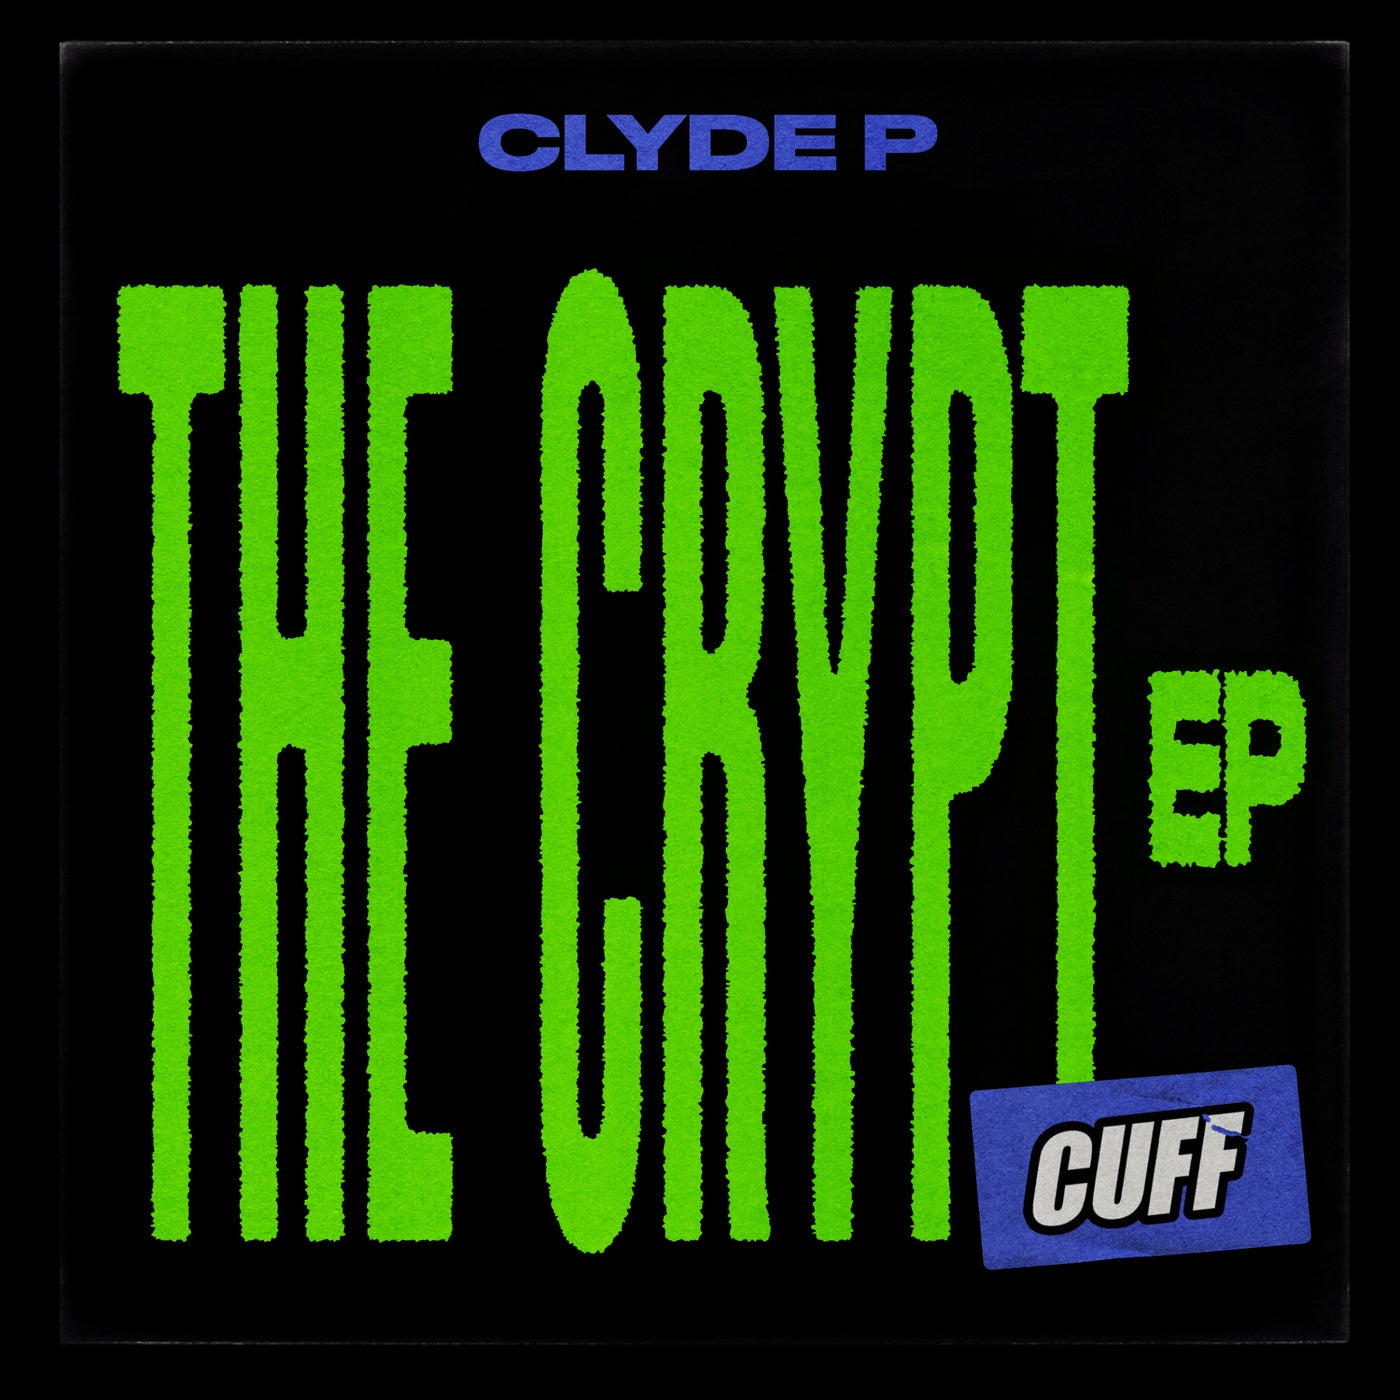 The Crypt EP